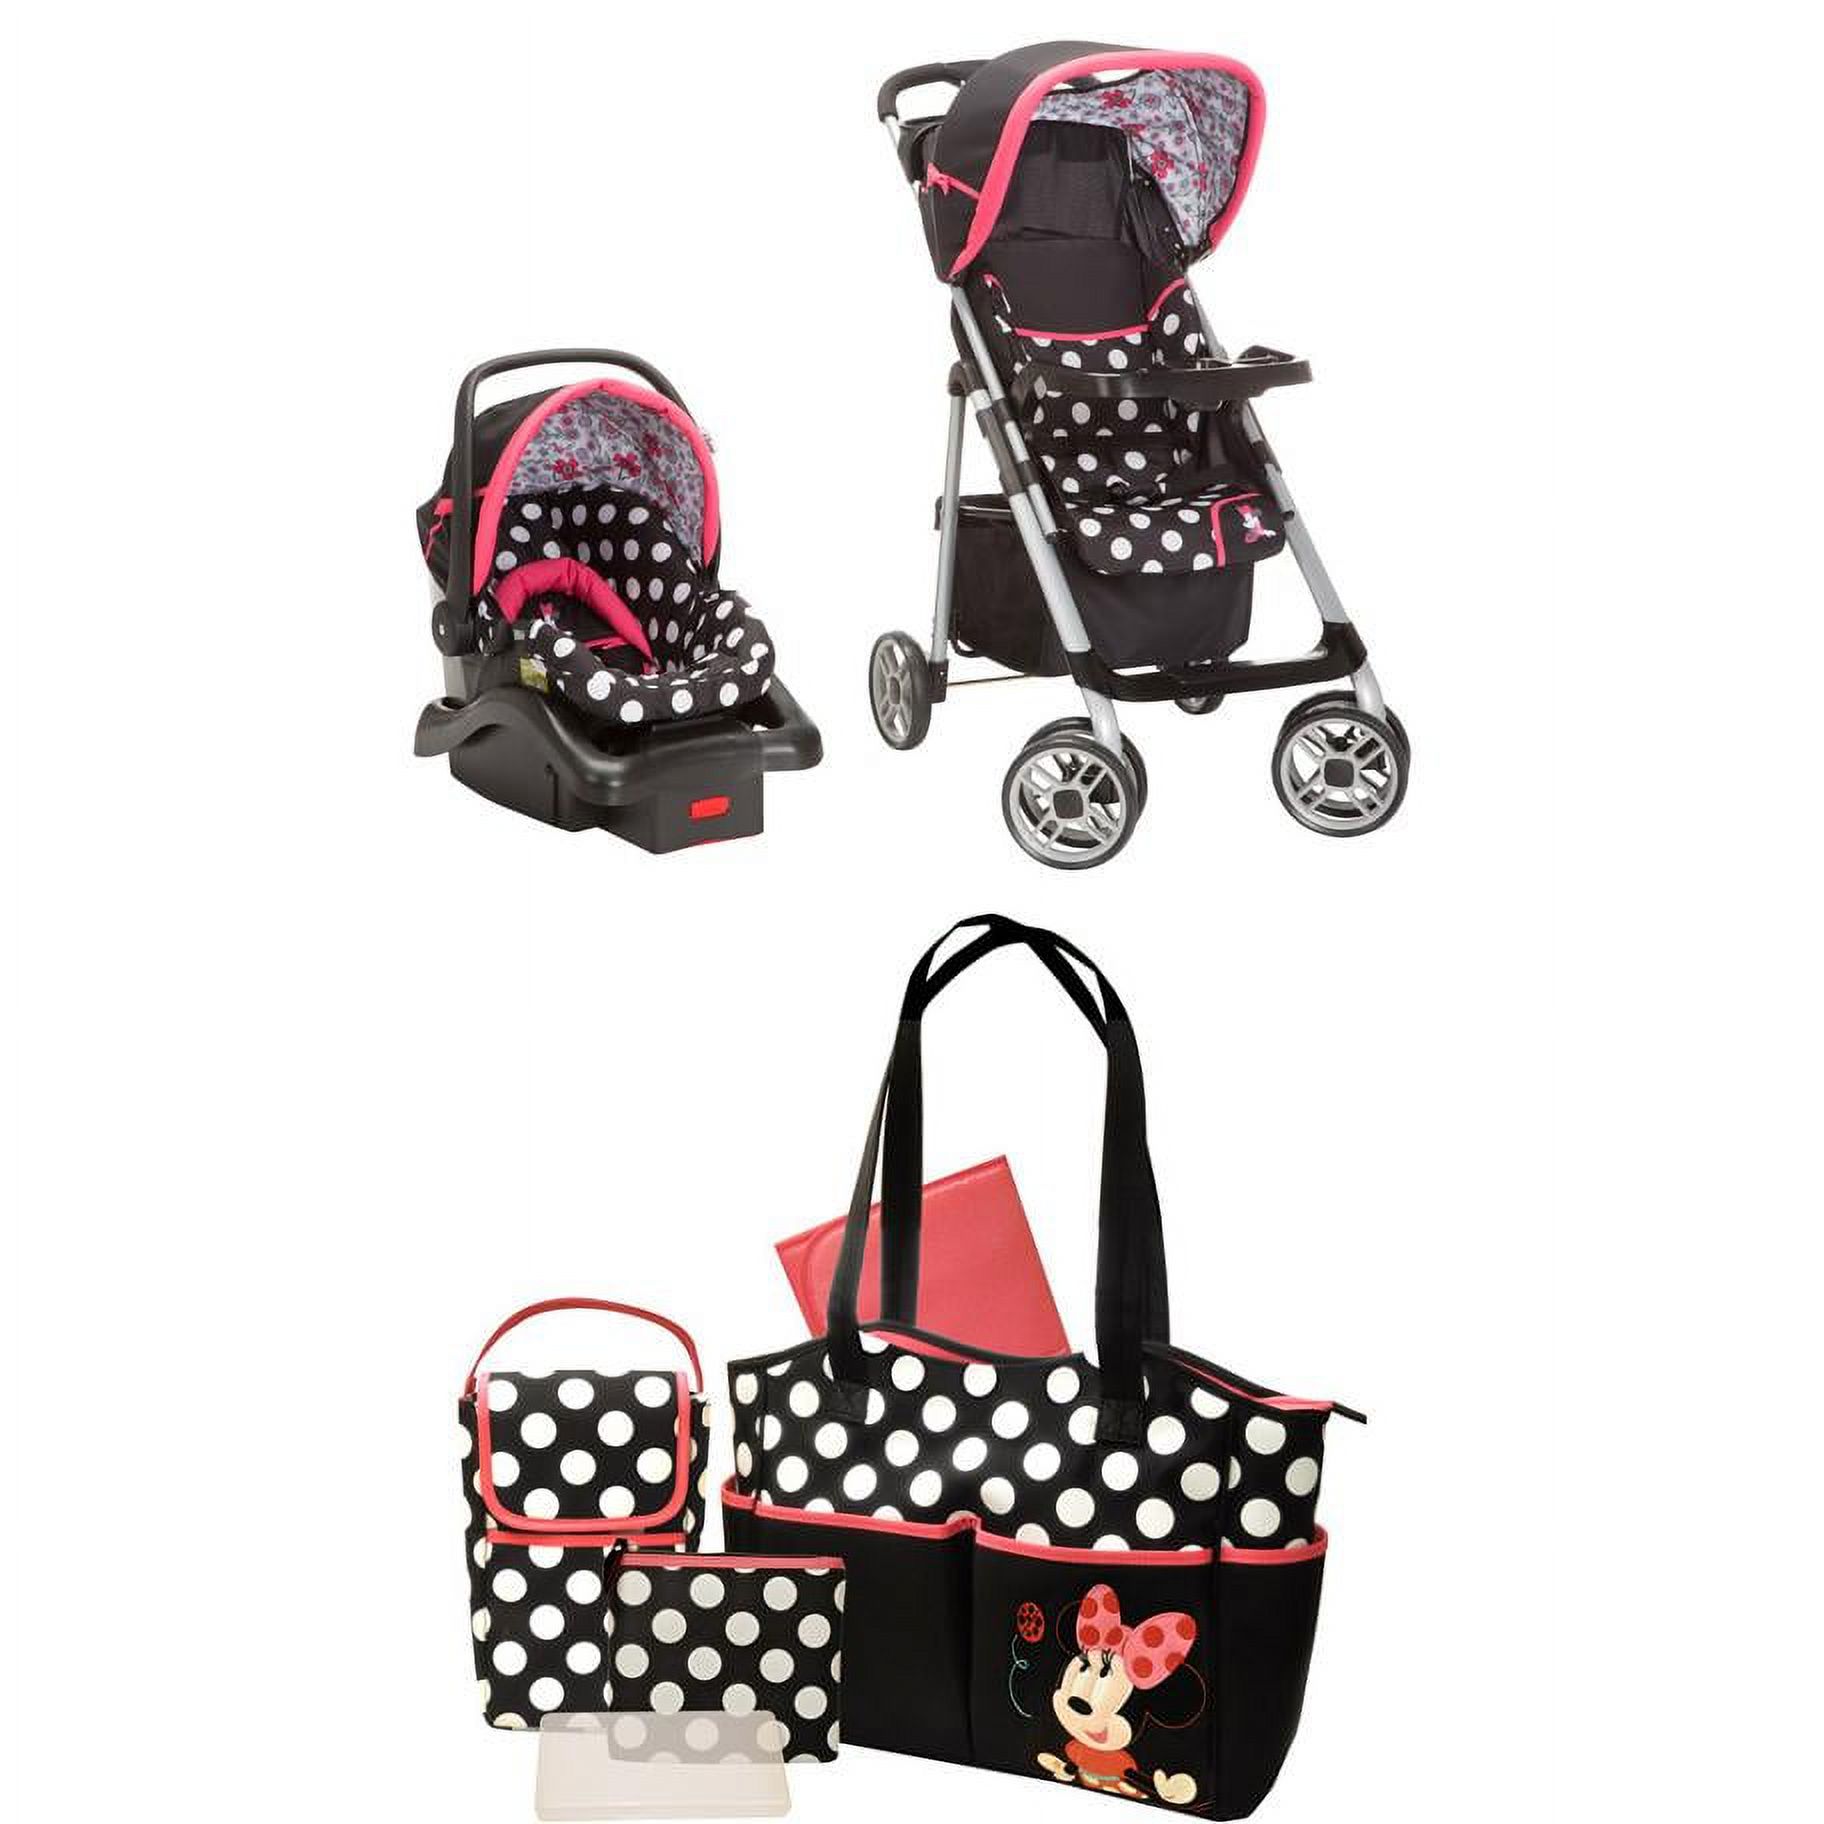 Disney Baby Minnie Mouse Coral Flowers Saunter Sport LC-22 Travel System with Bonus Minnie Diaper Bag - image 1 of 3